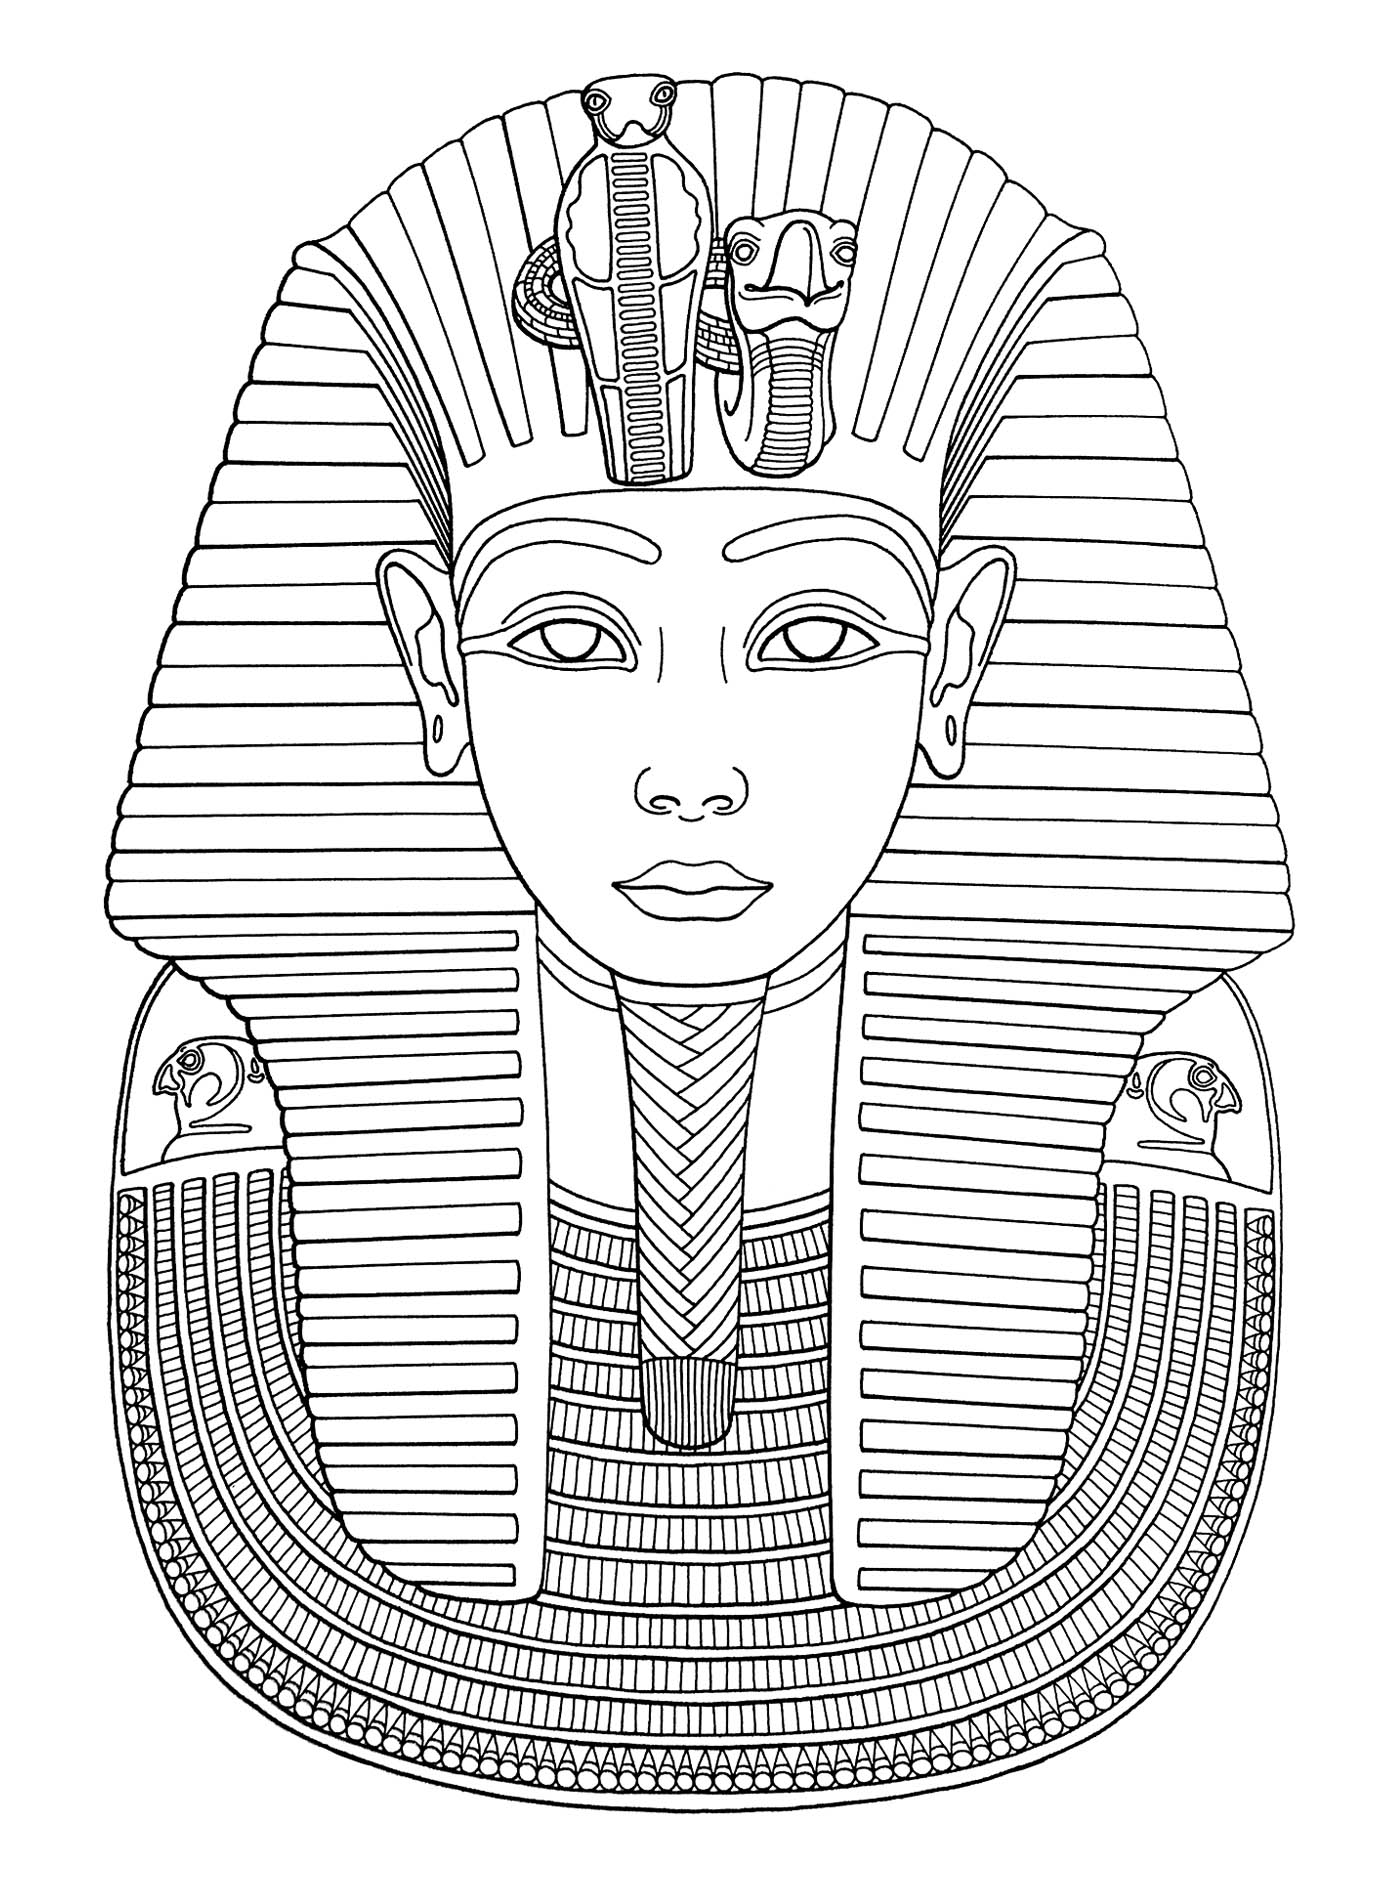 Download Egypt free to color for kids - Egypt Kids Coloring Pages